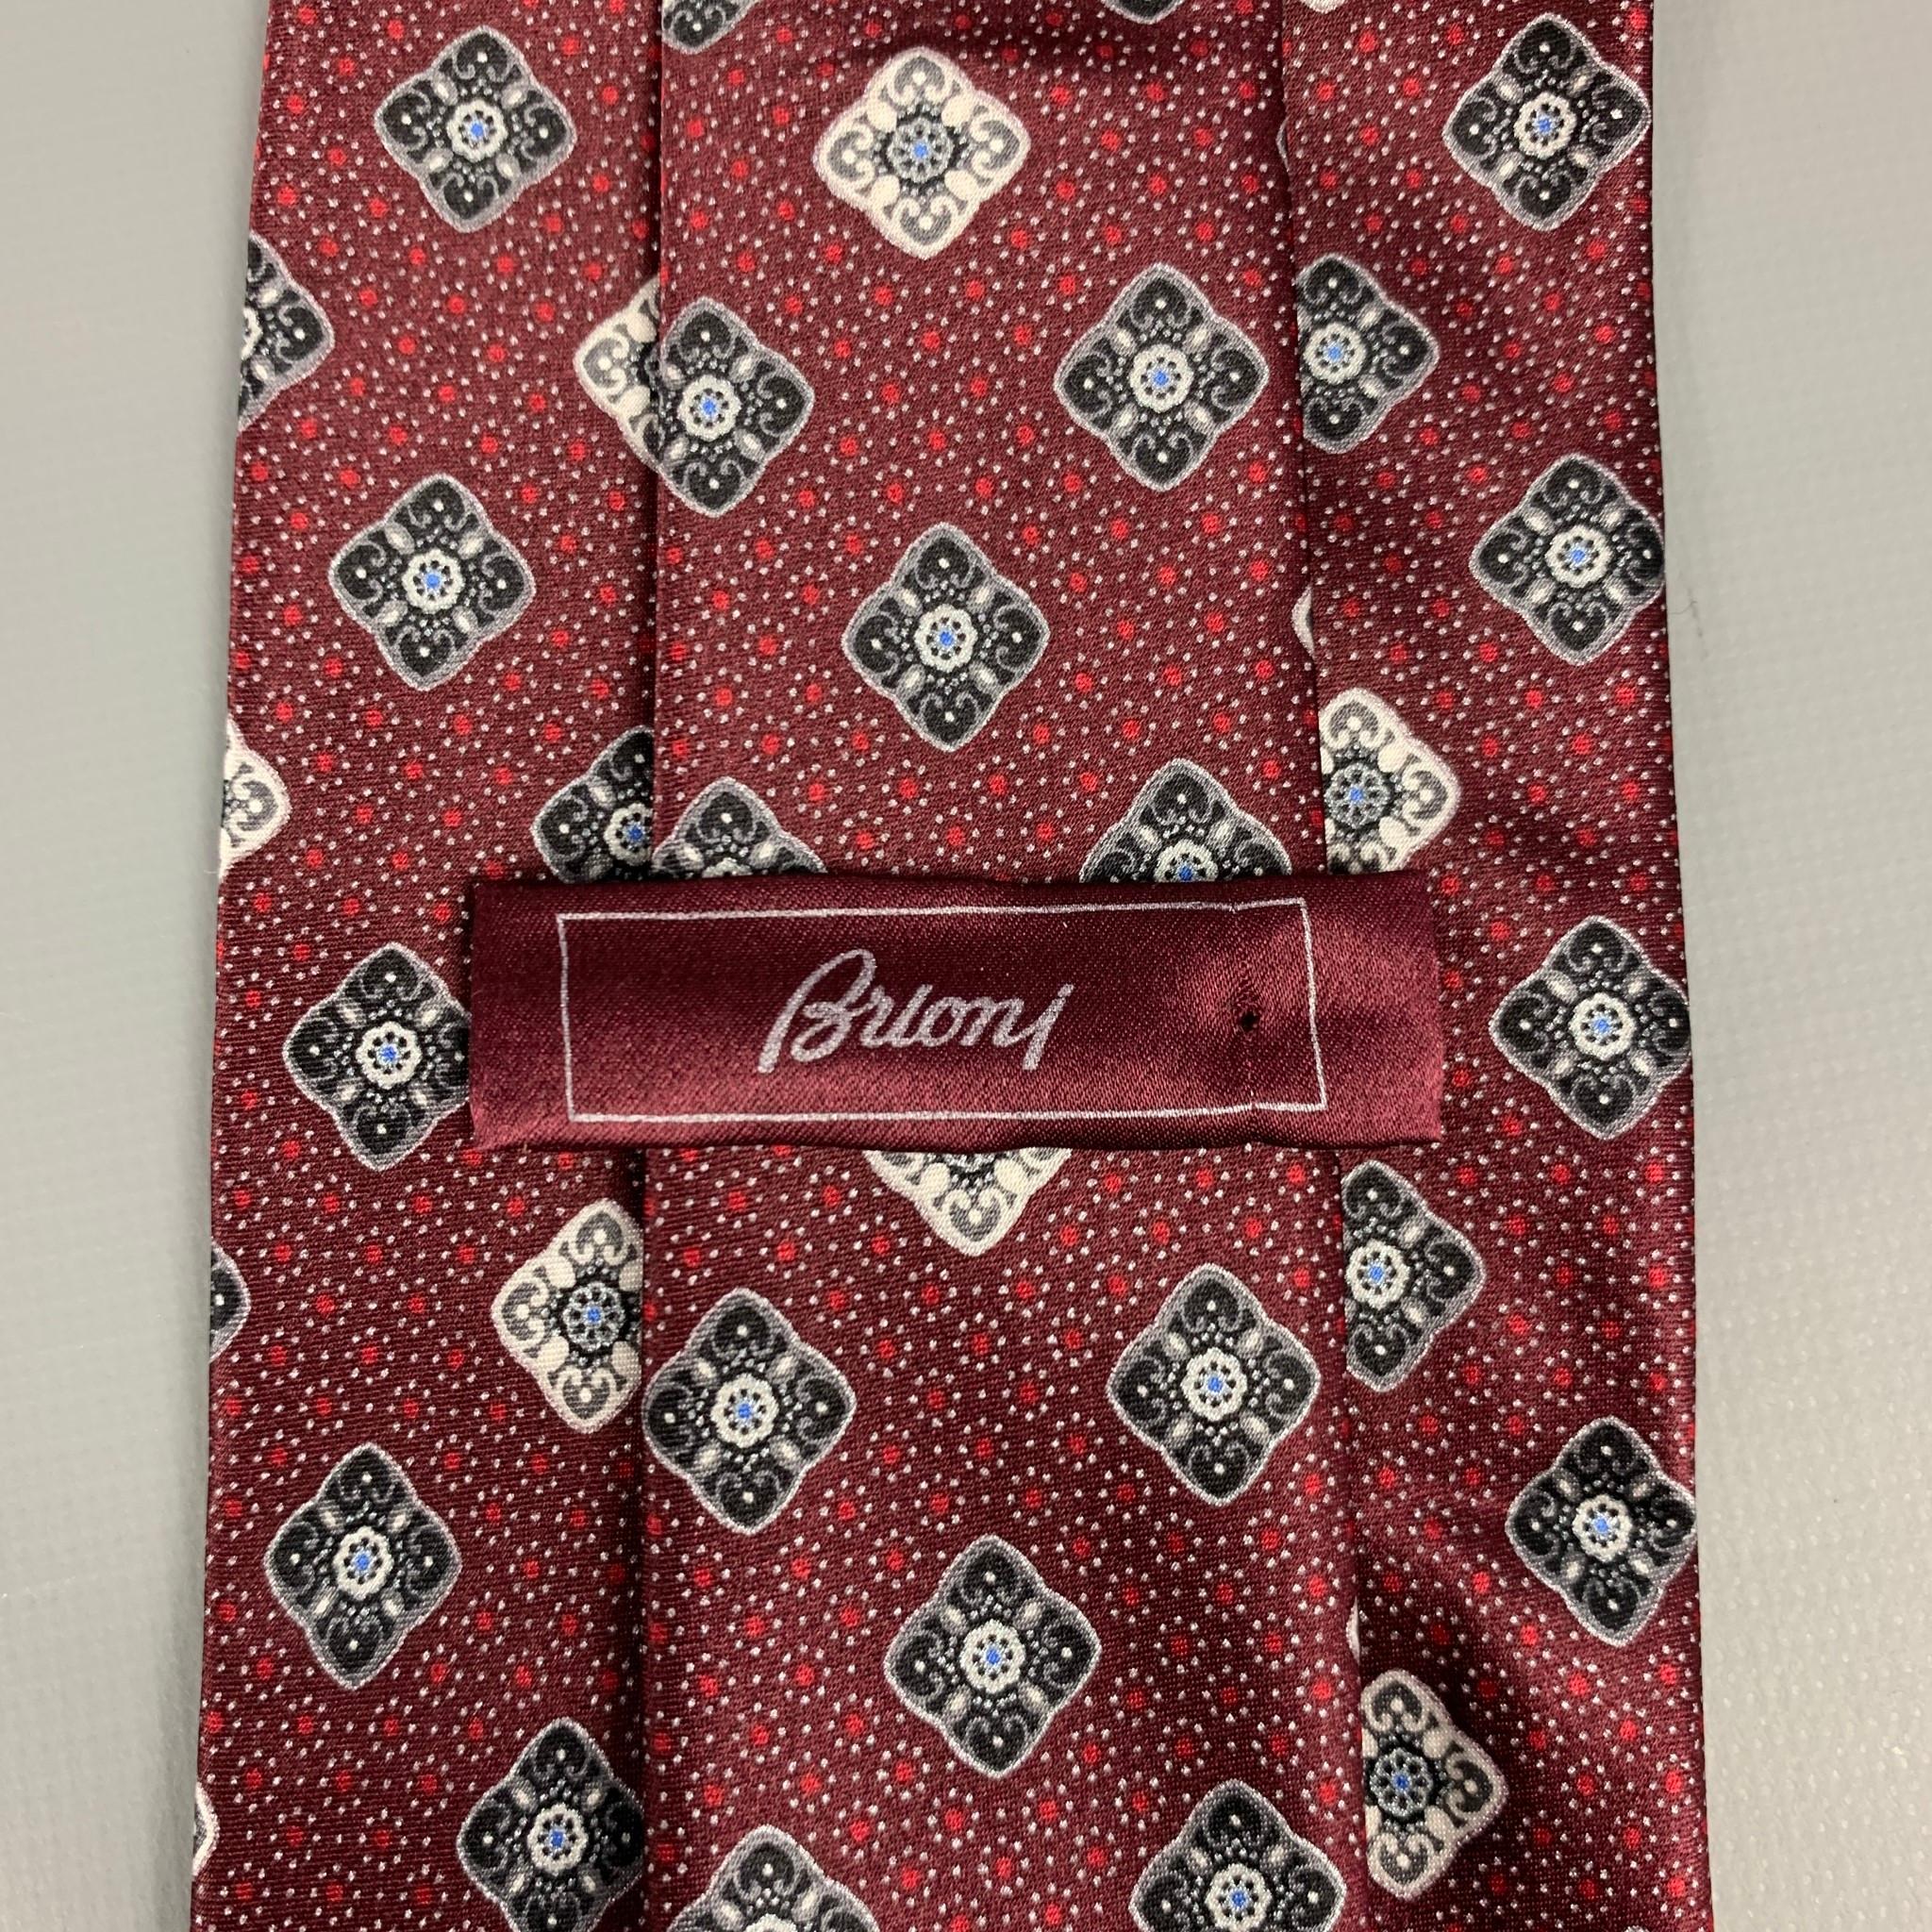 red and blue silk pattern jacquard tie from brioni